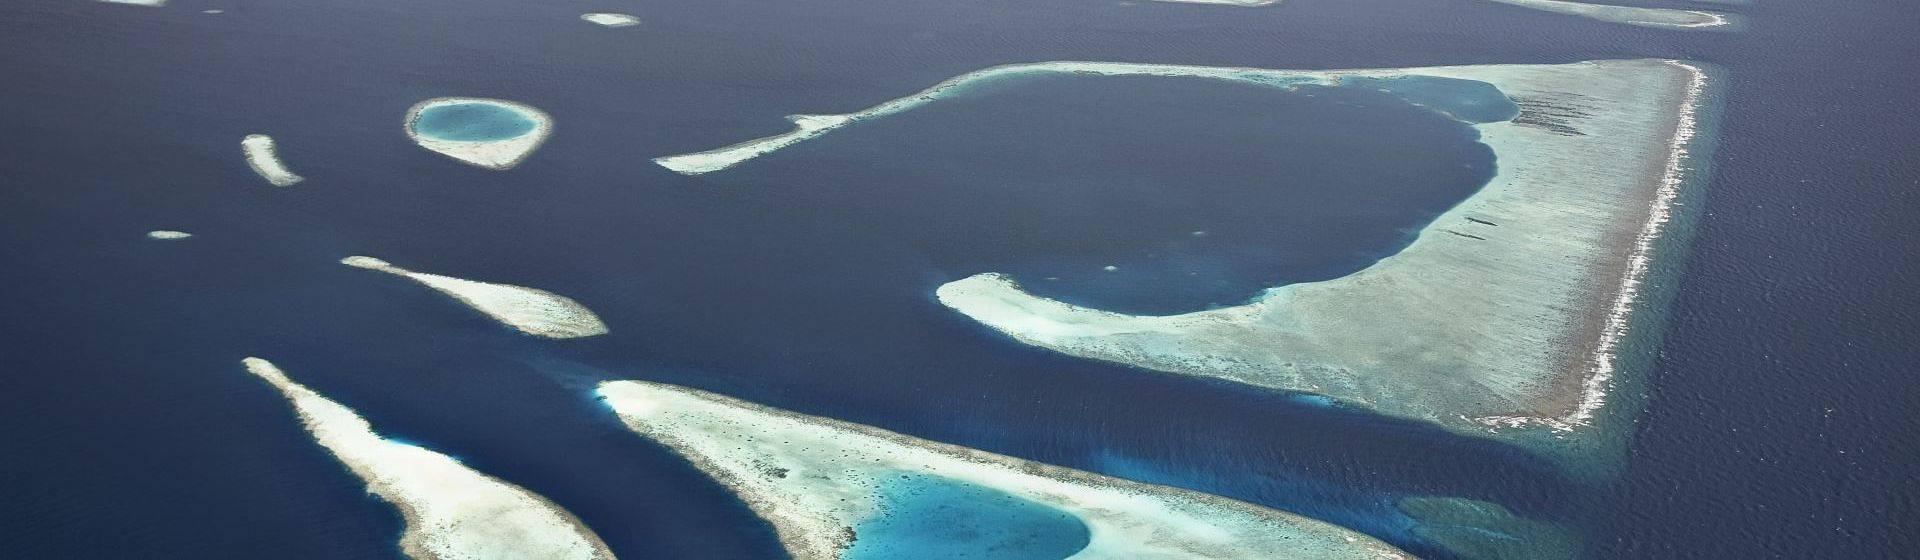 Holidays to North Male Atoll Image